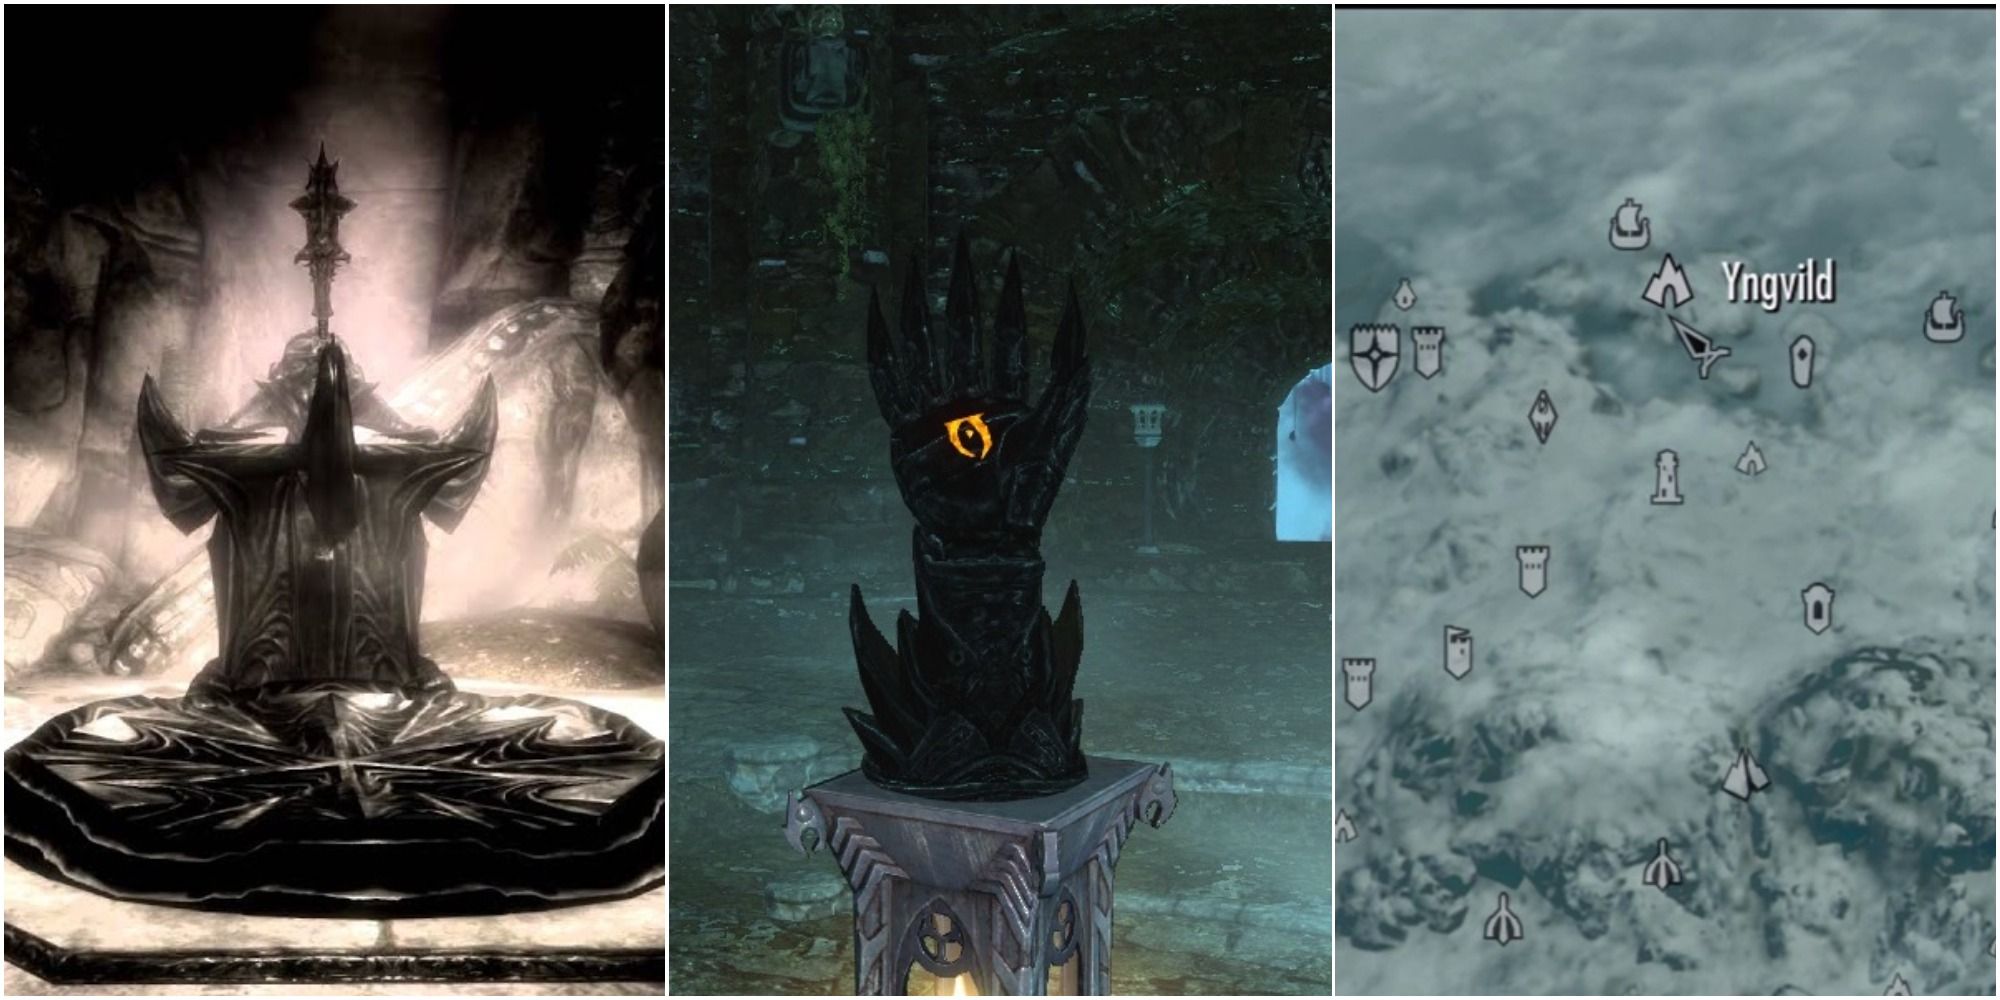 Molag Bal's Shrine, The Midden and Yngvild are some creepy locations in Skyrim